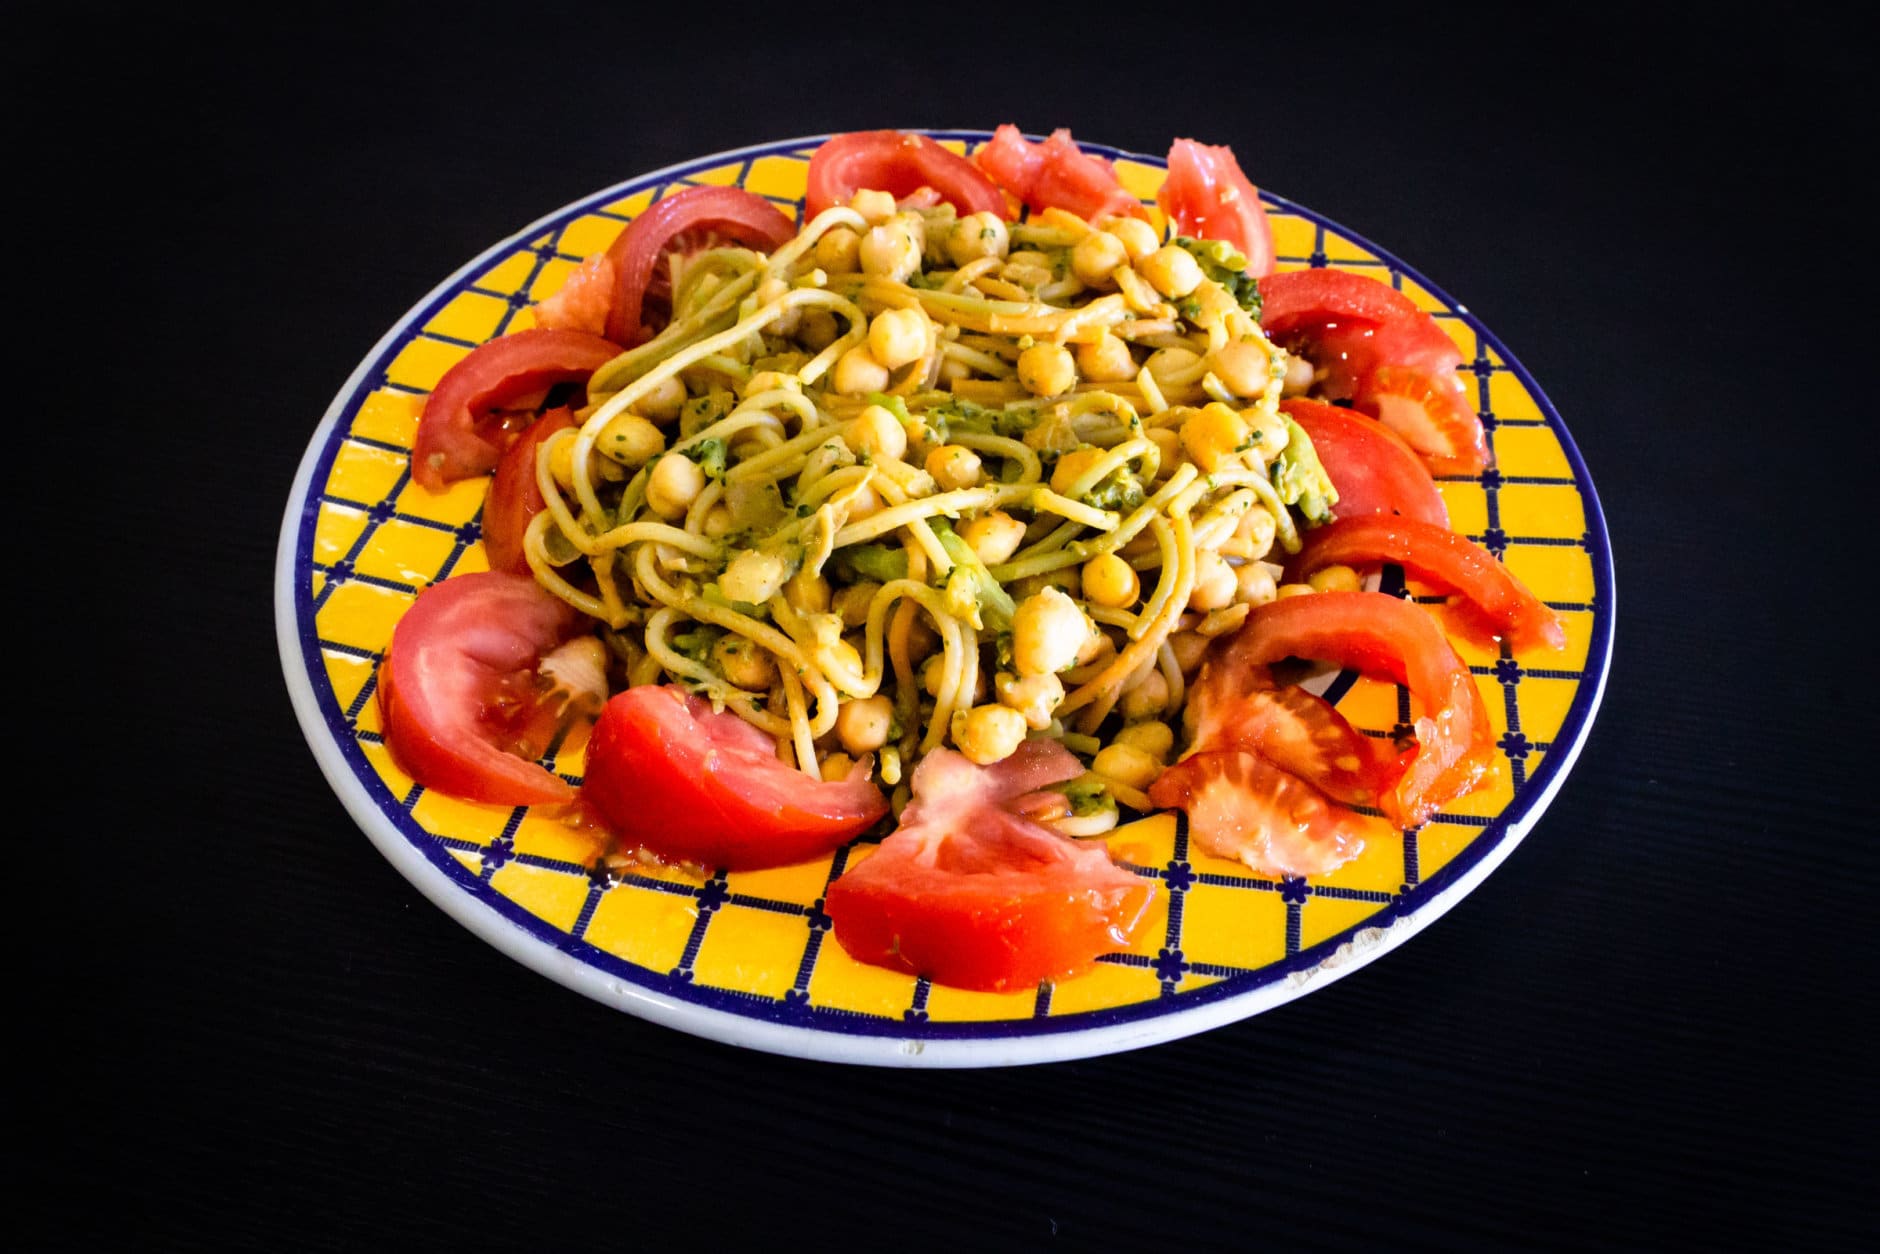 Food Dish on Black Wooden Background. Chickpeas, Spaghetti, Broccoli, Onions, Tomato. Yellow Blue Plate. Close Up.